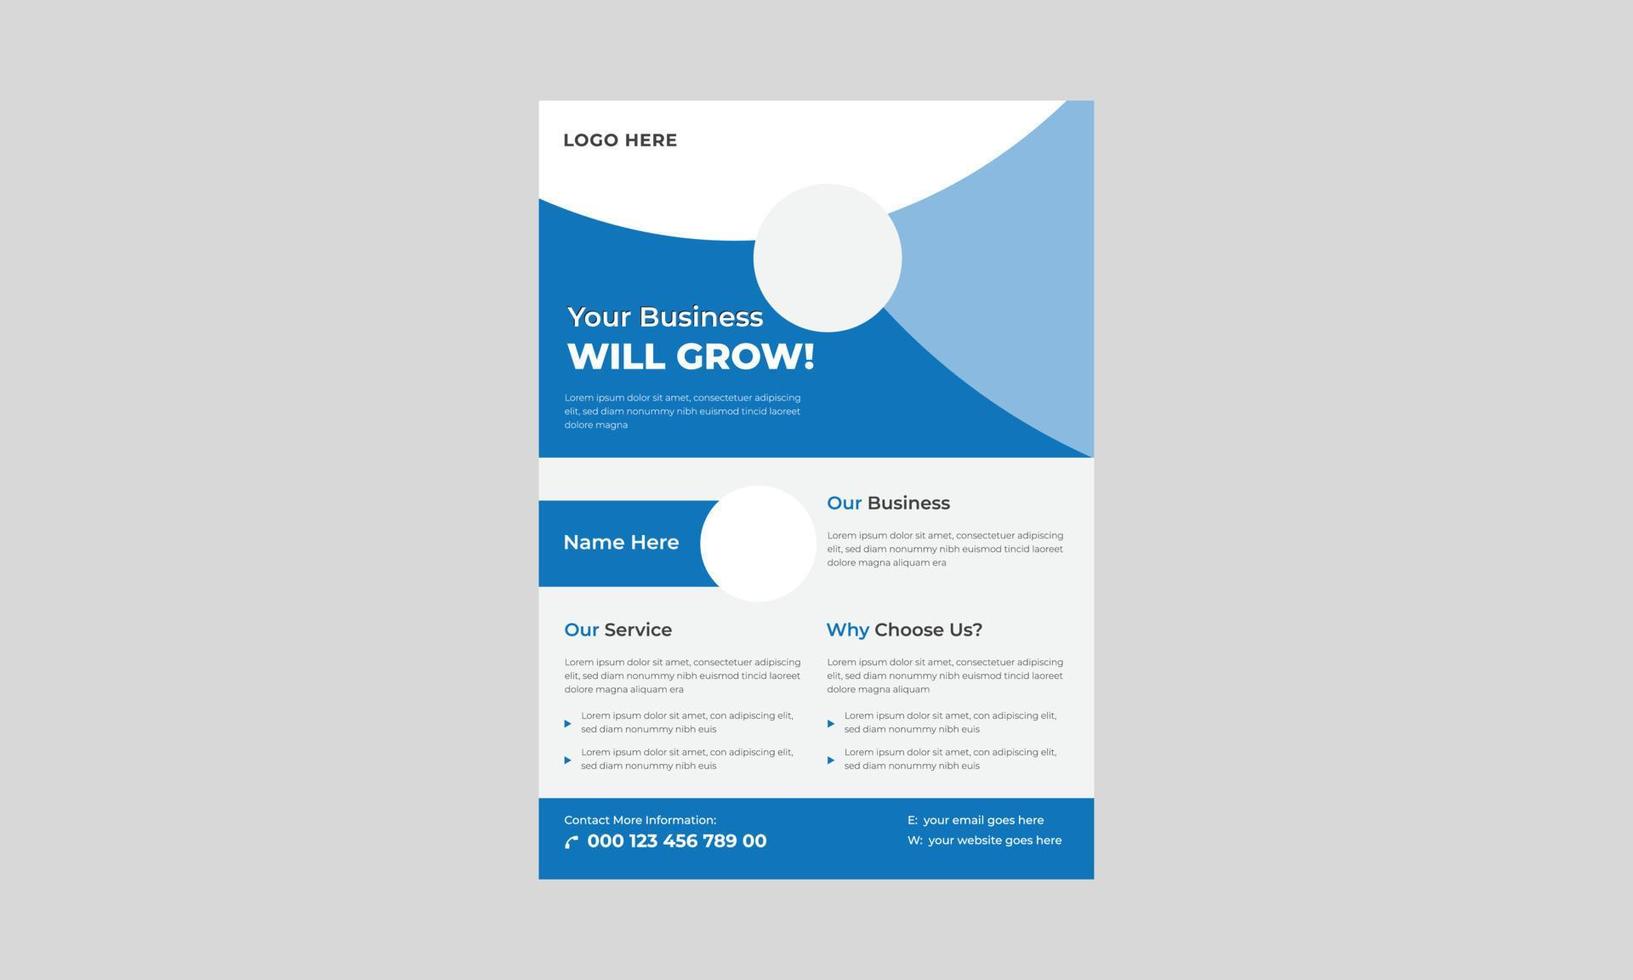 Corporate business flyer template, digital marketing agency flyer, business marketing flyer set, grow your business digital marketing new flyer, poster, print-ready. vector